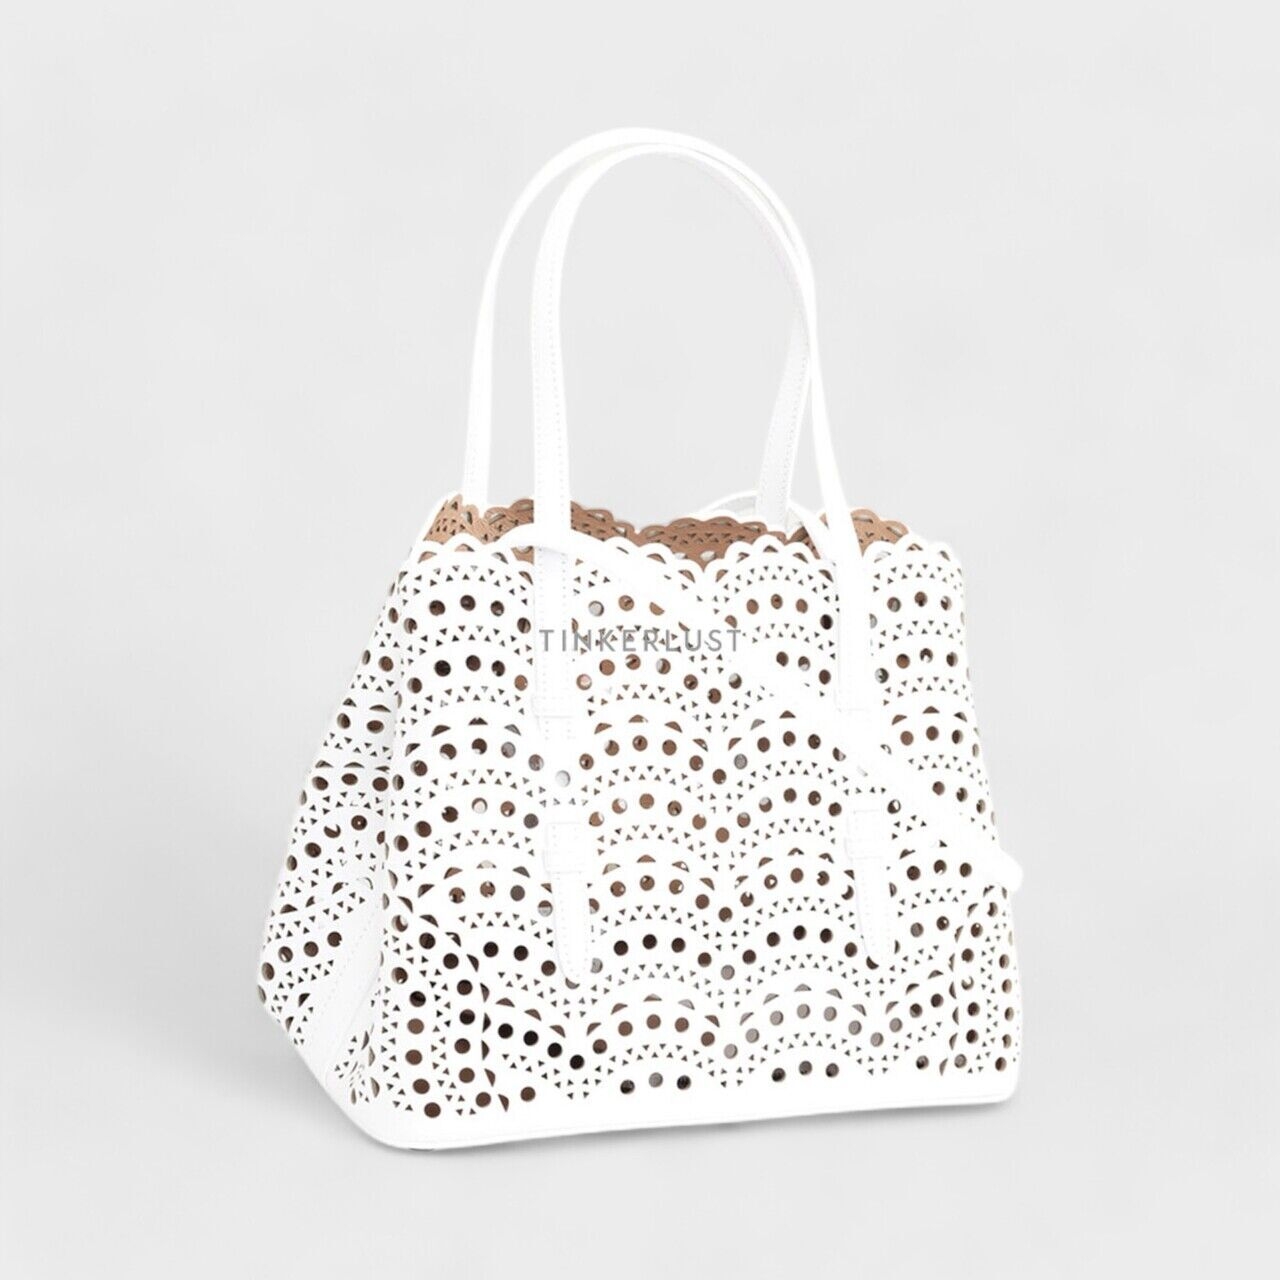 Alaia Mina 25 Lasered Handbag in White with Inner Pouch Satchel